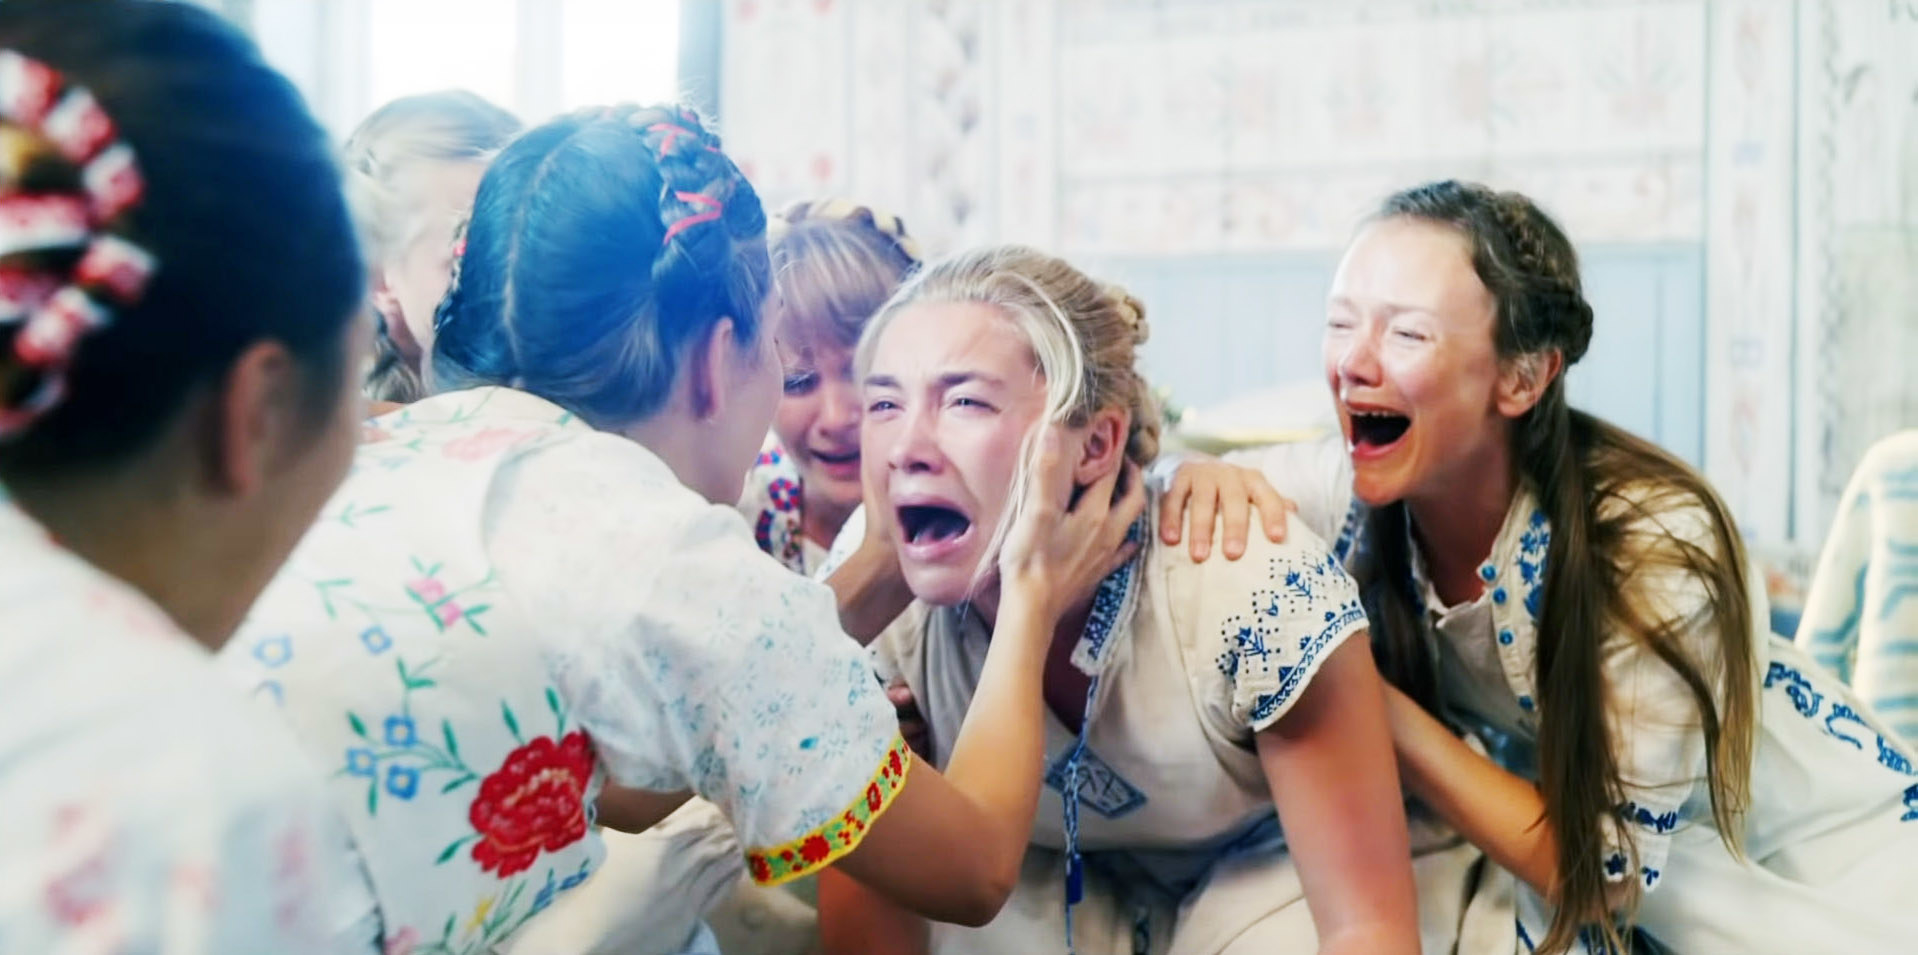 Florence Pugh screams with other women